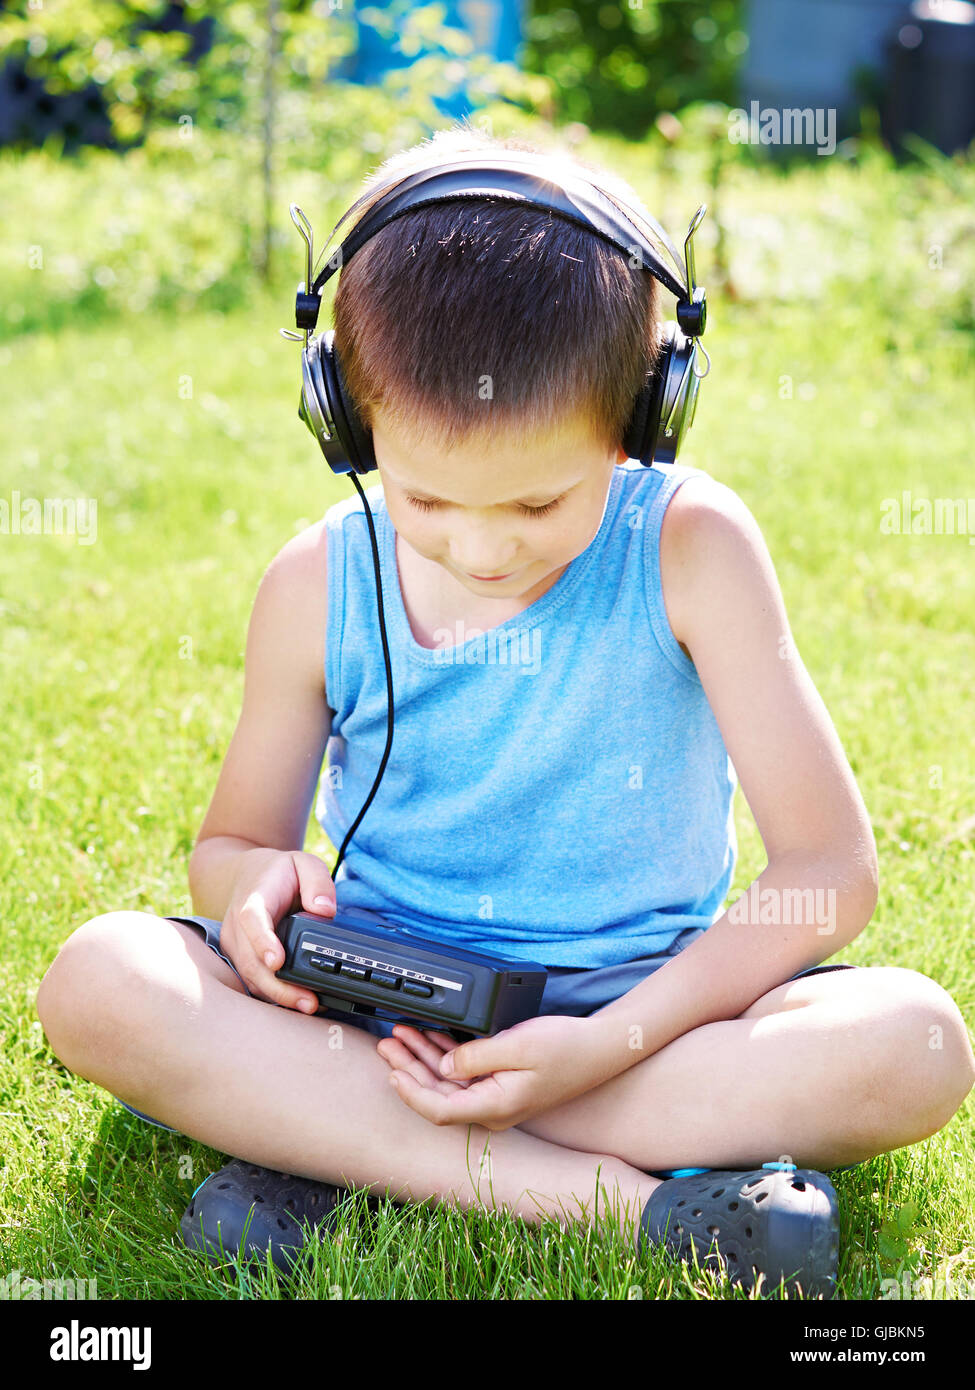 Little boy with old audio cassette player and headphones Stock Photo